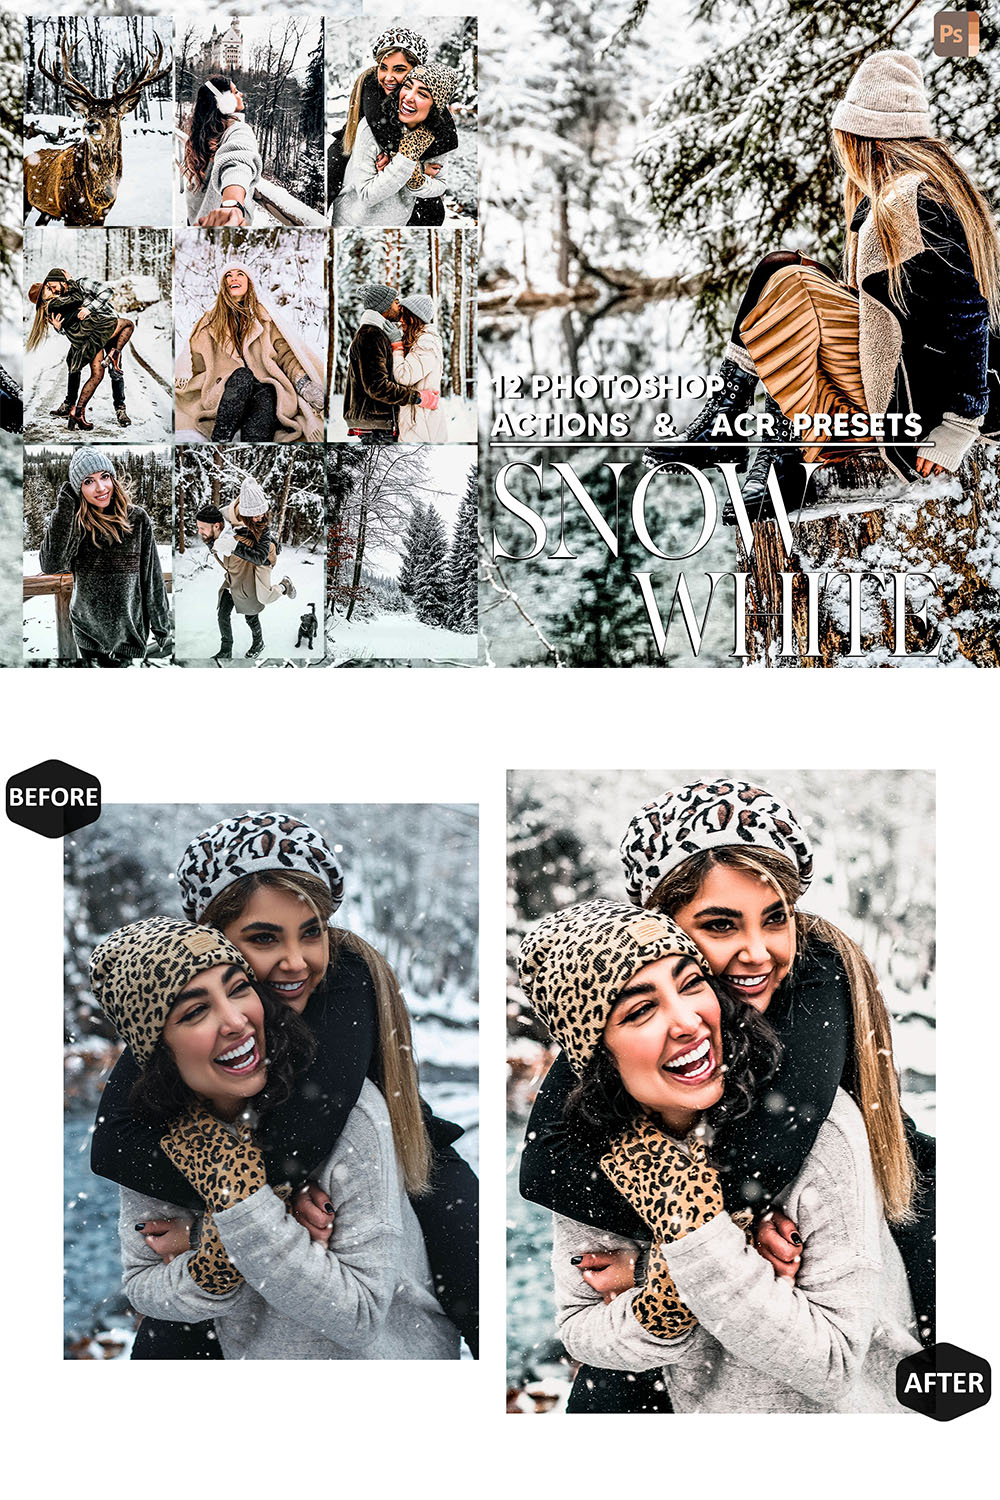 12 Photoshop Actions, Snow White Ps Action, Moody ACR Preset, Cool Light Ps Filter, Atn Pictures And style Theme For Instagram, Blogger pinterest preview image.